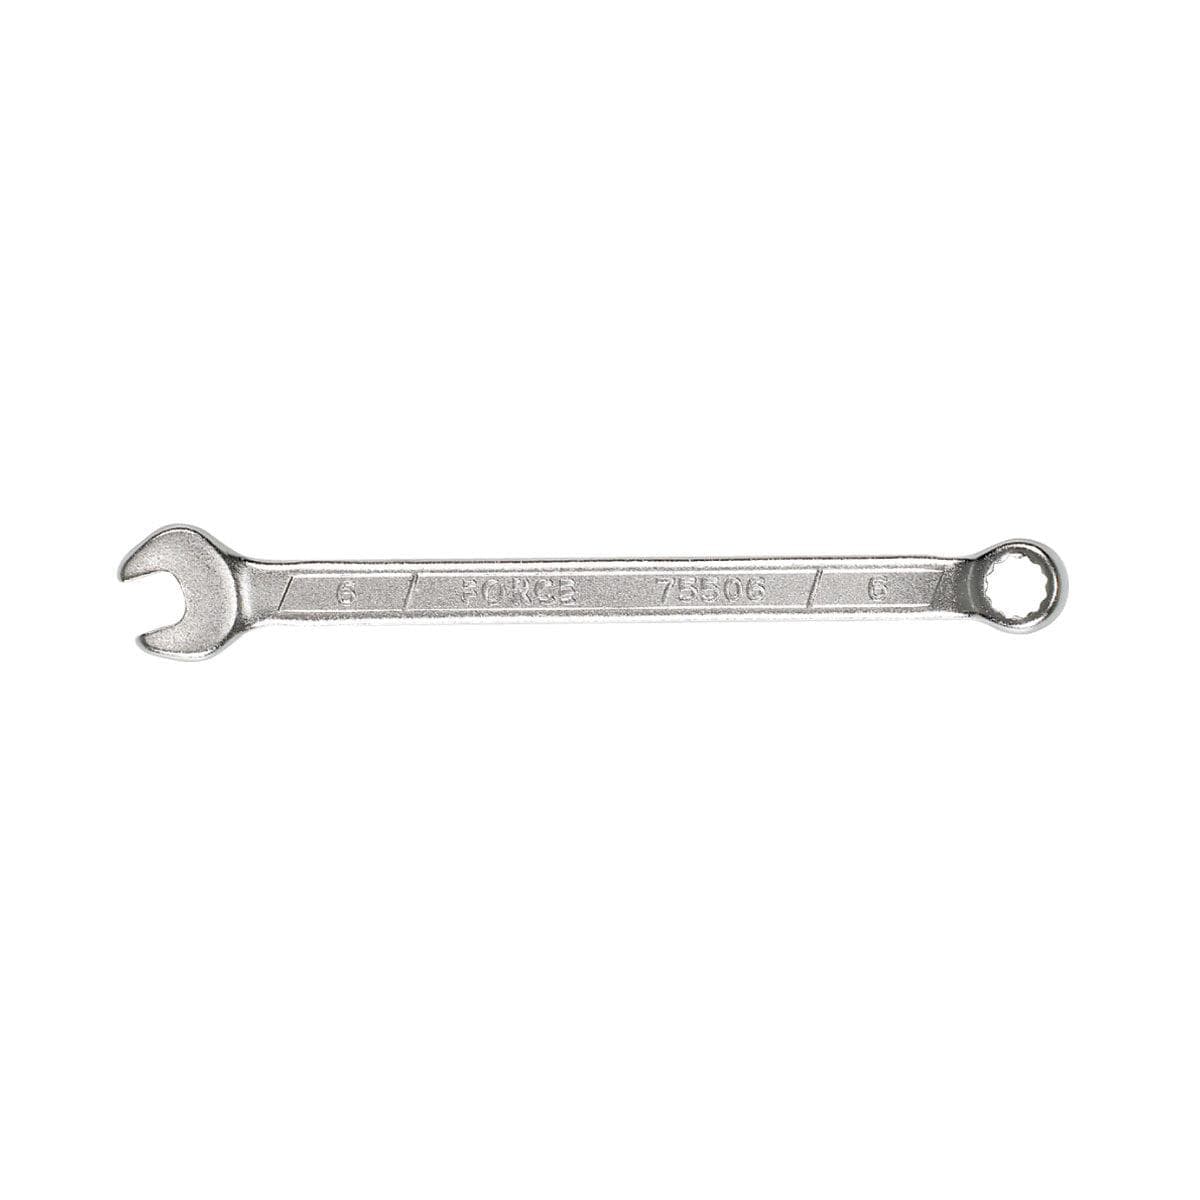 Cyclo 23Mm Open/Ring Spanner: